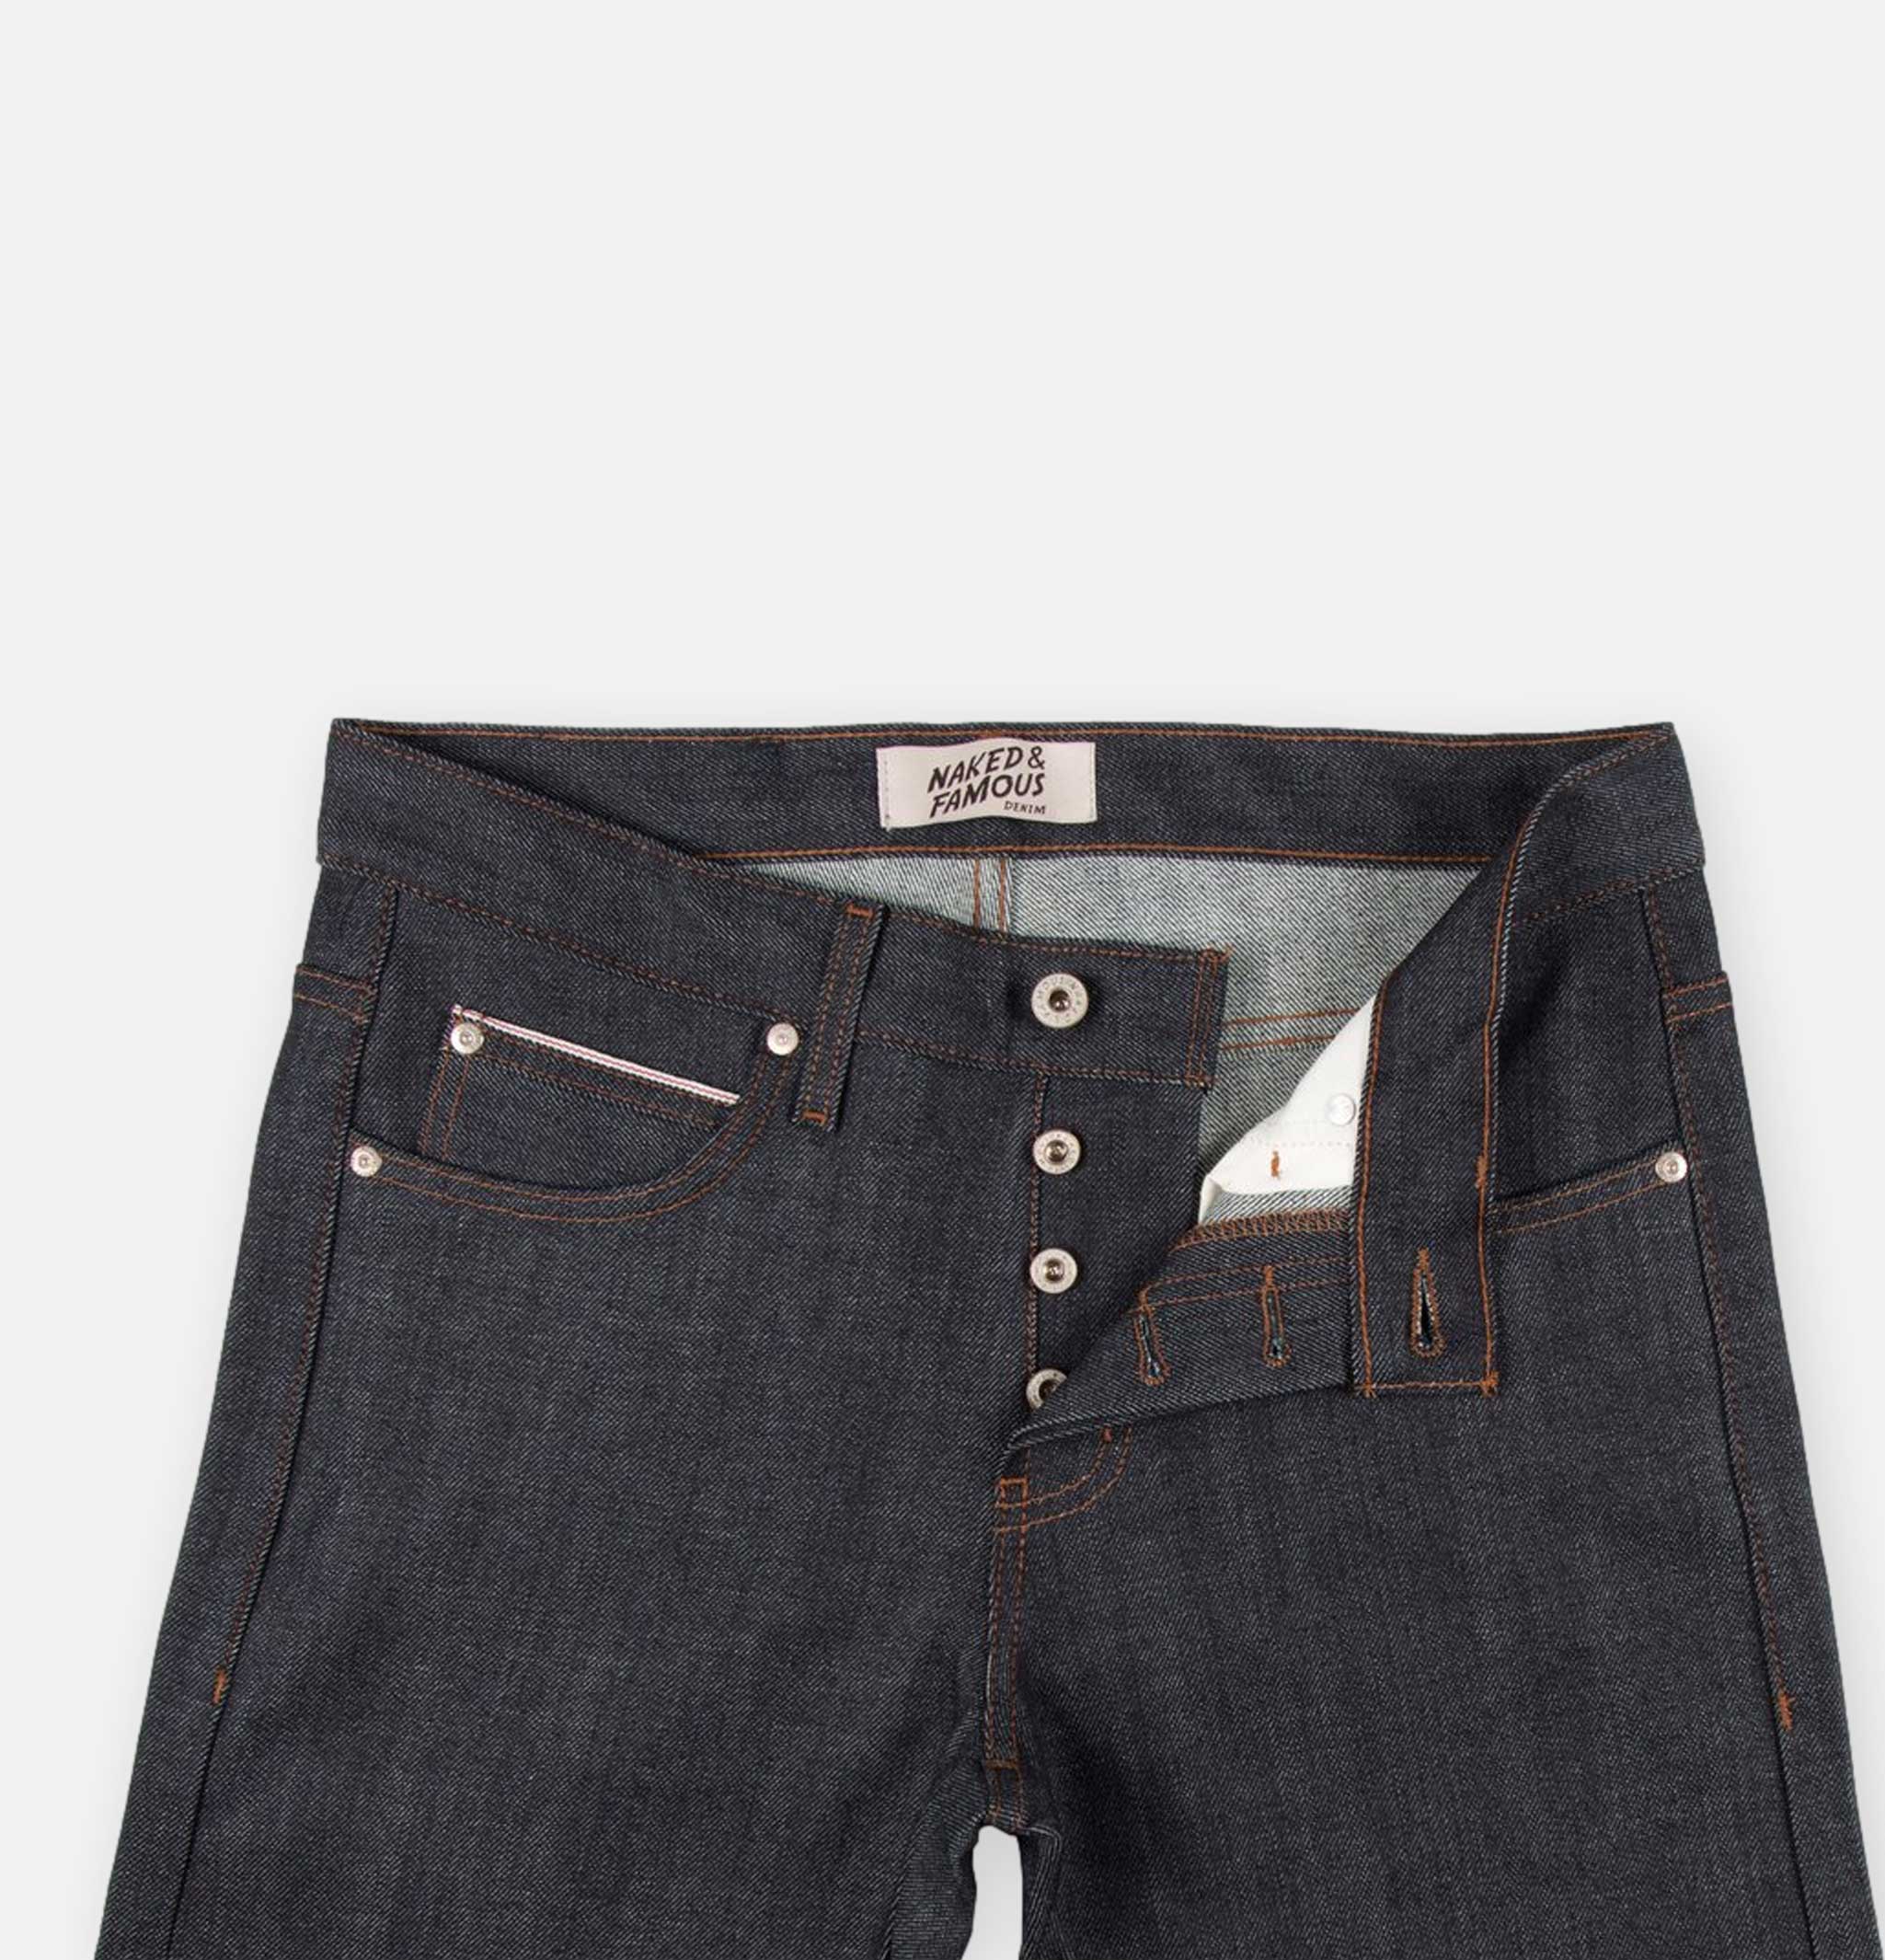 Naked & Famous Super Guy Super Stretch Selvedge